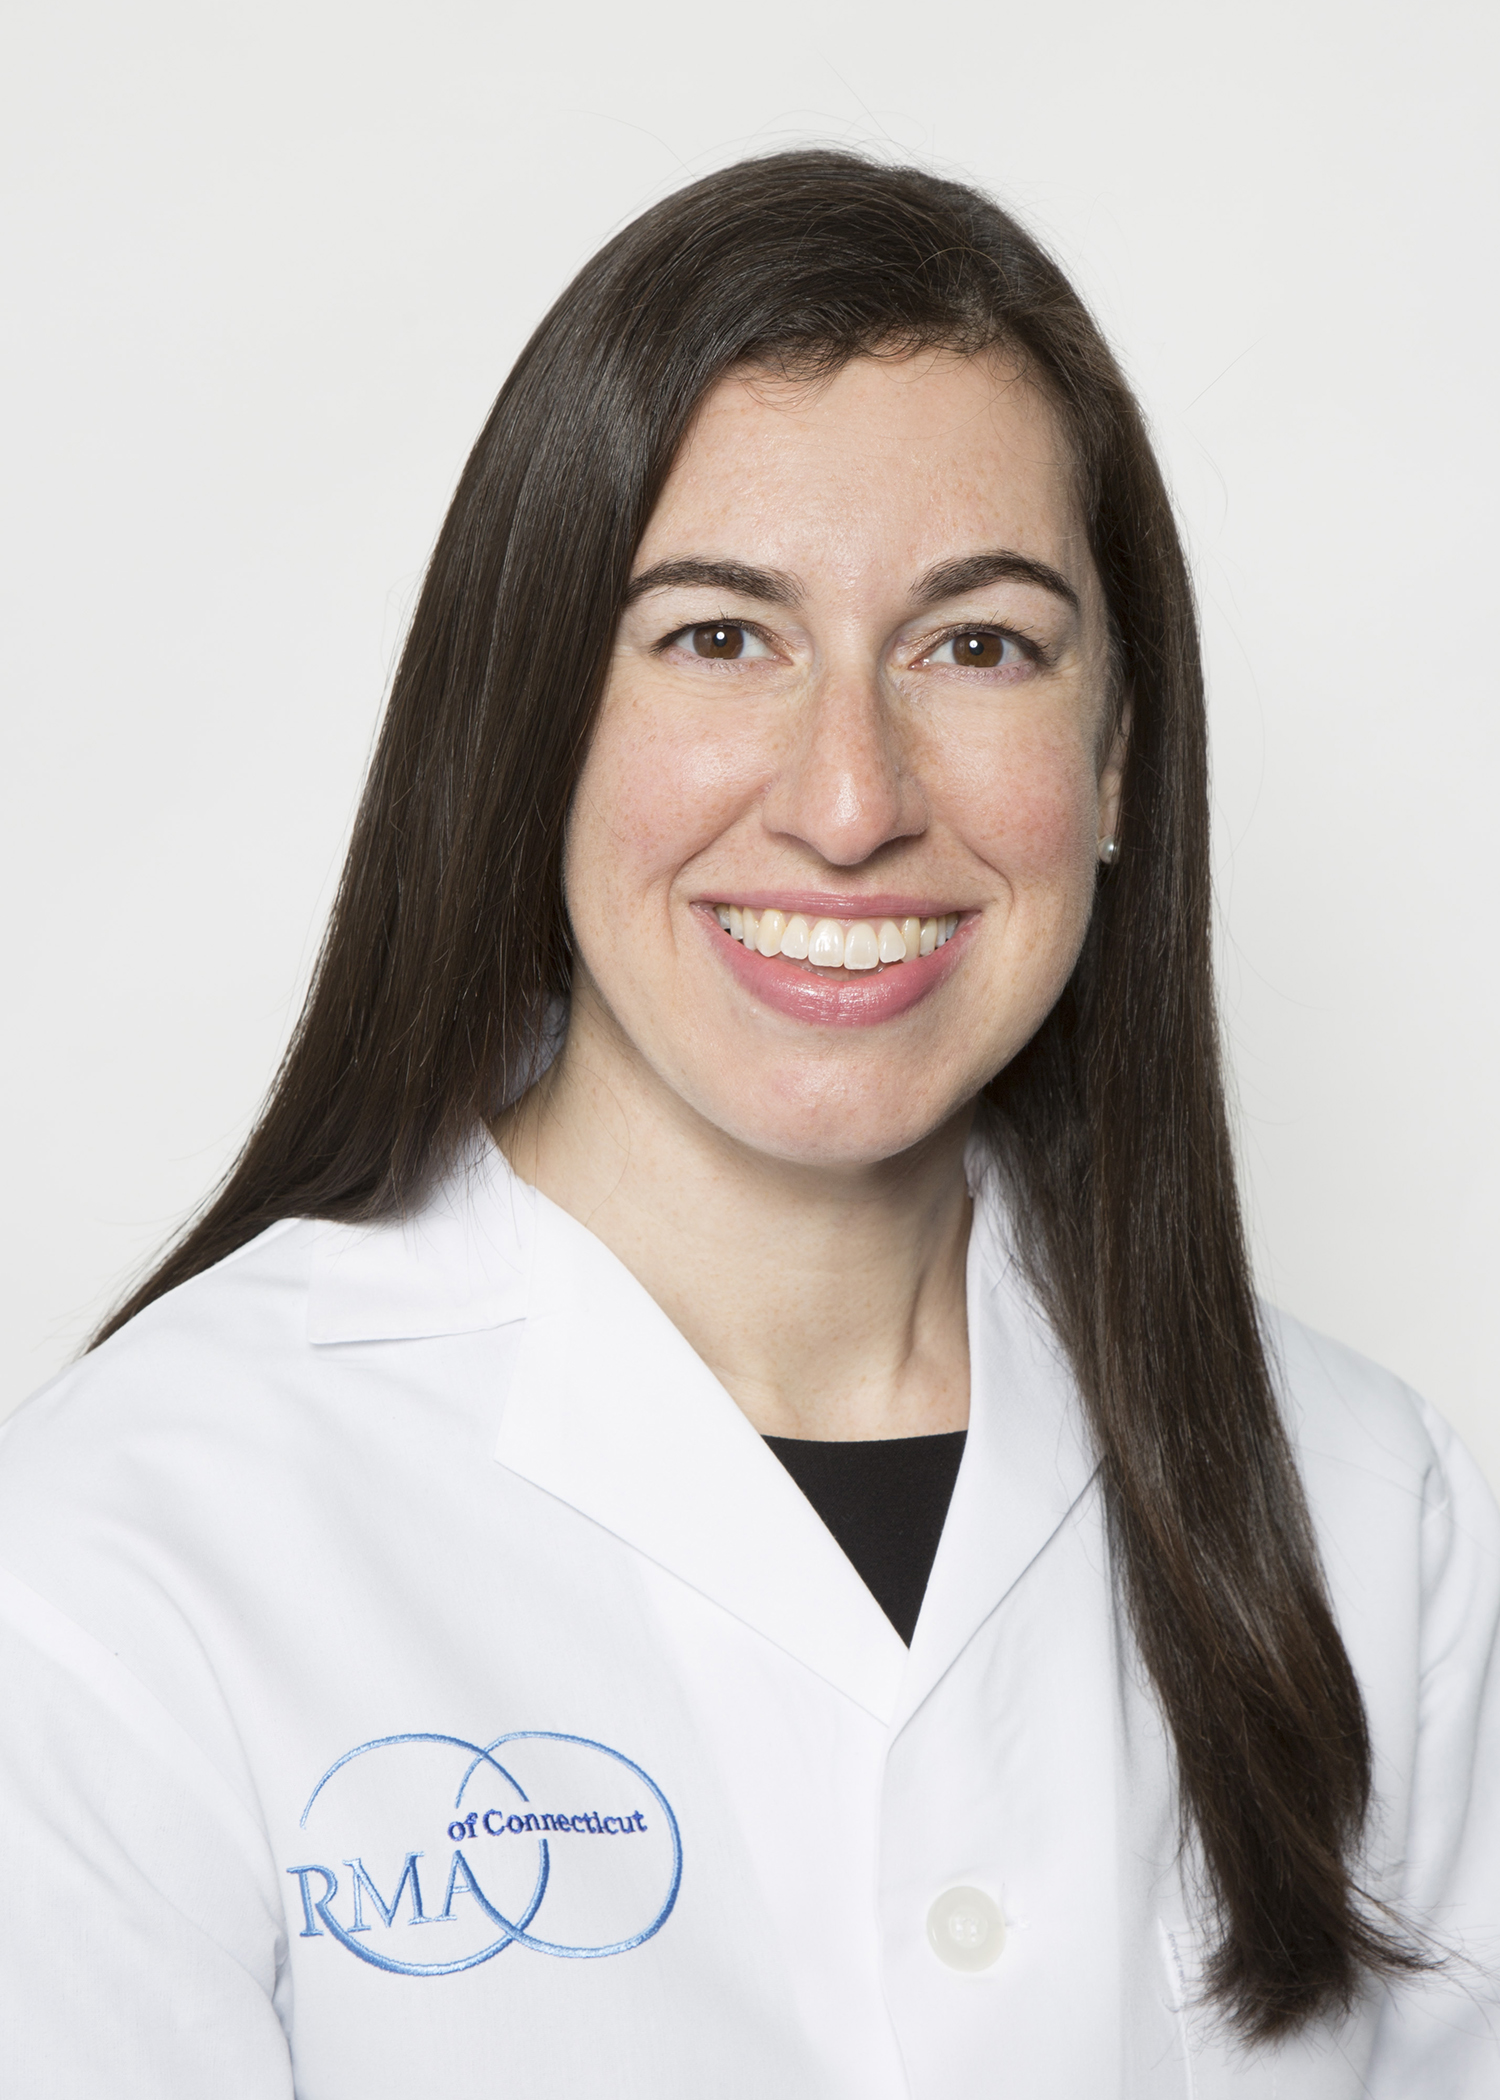 RMA of Connecticut doctor, Ilana Ressler, to host PCOS awareness campaign for young women